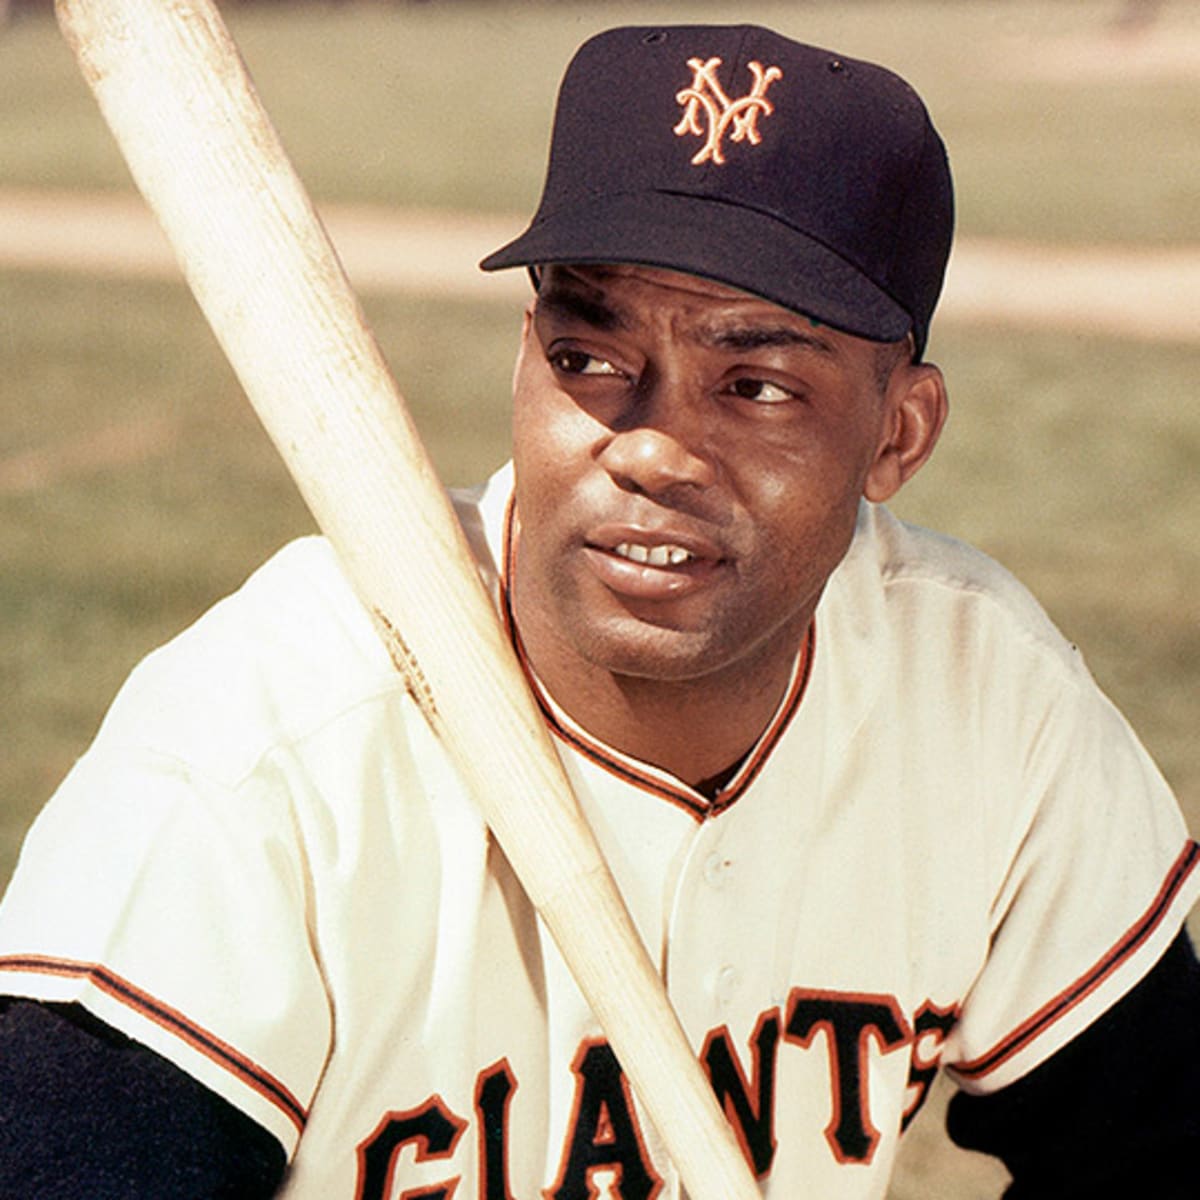 N.J. will now celebrate Larry Doby Day in honor of the man who